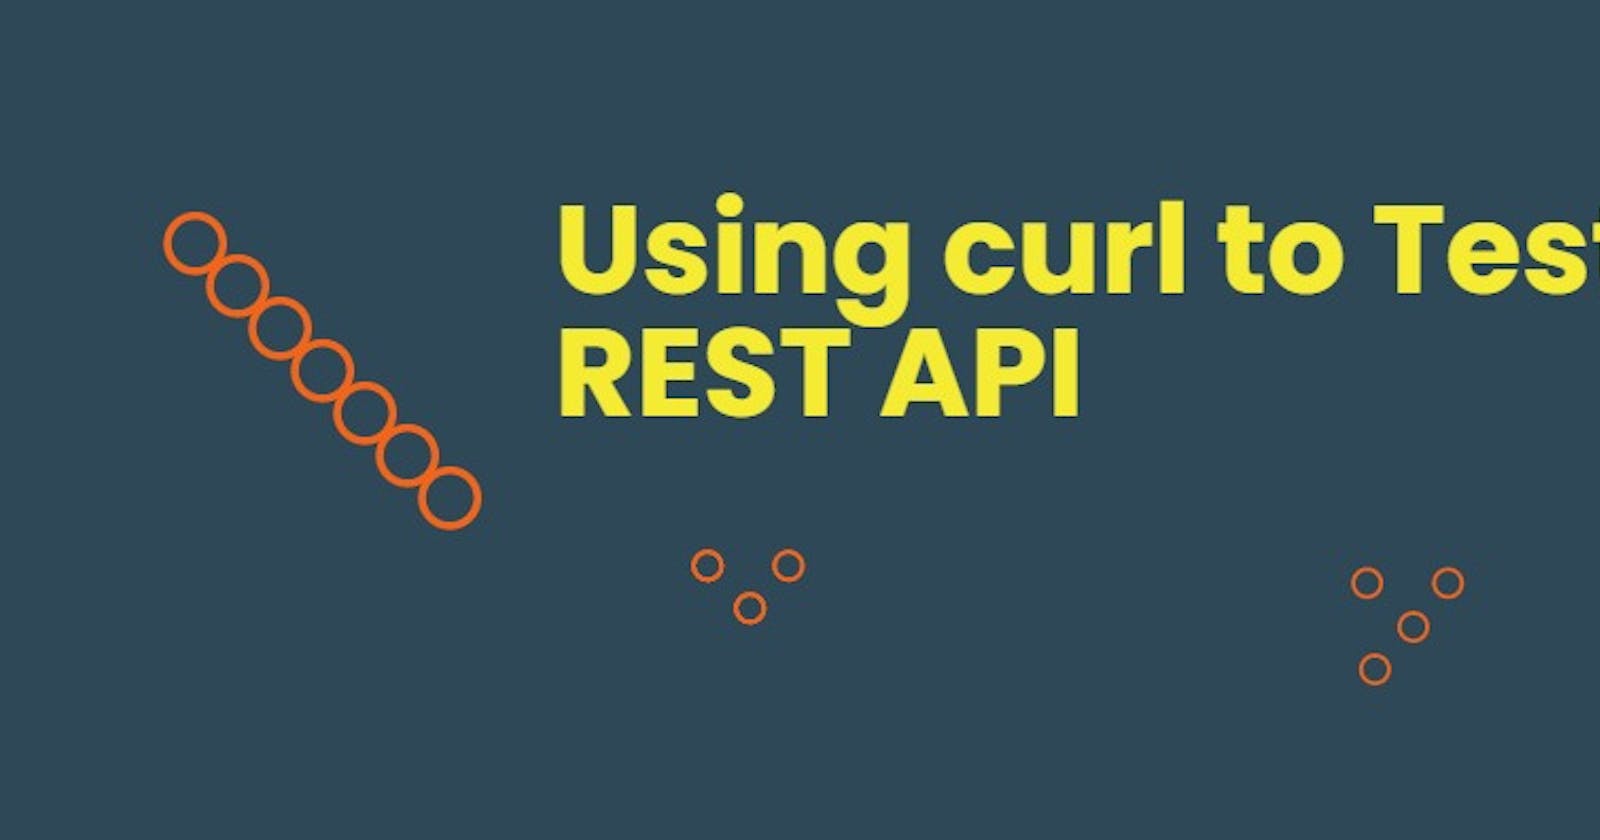 Using curl to test a REST API